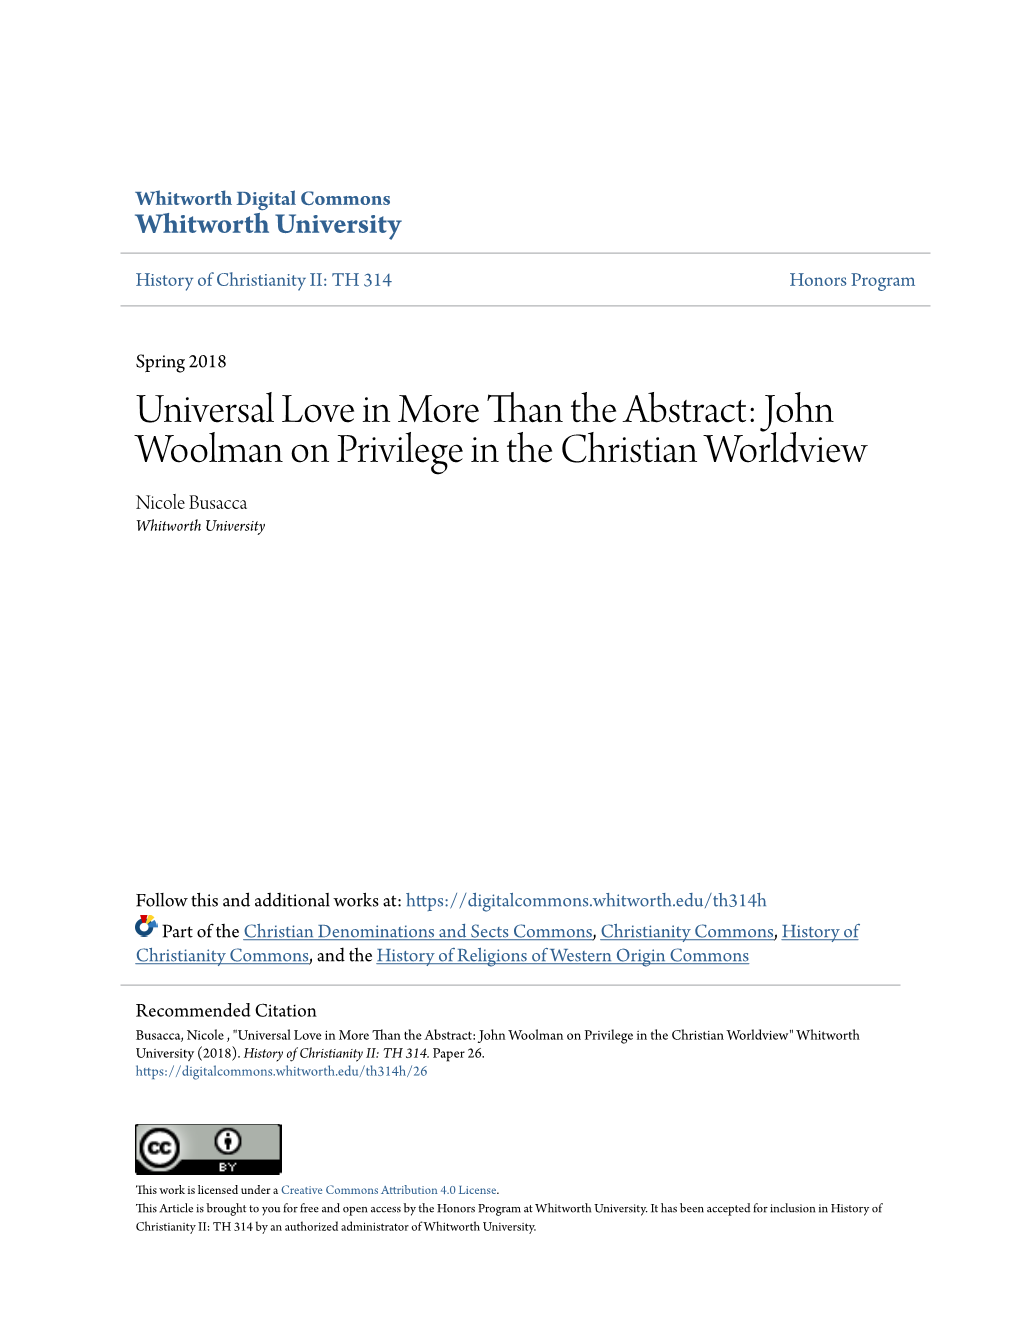 John Woolman on Privilege in the Christian Worldview Nicole Busacca Whitworth University